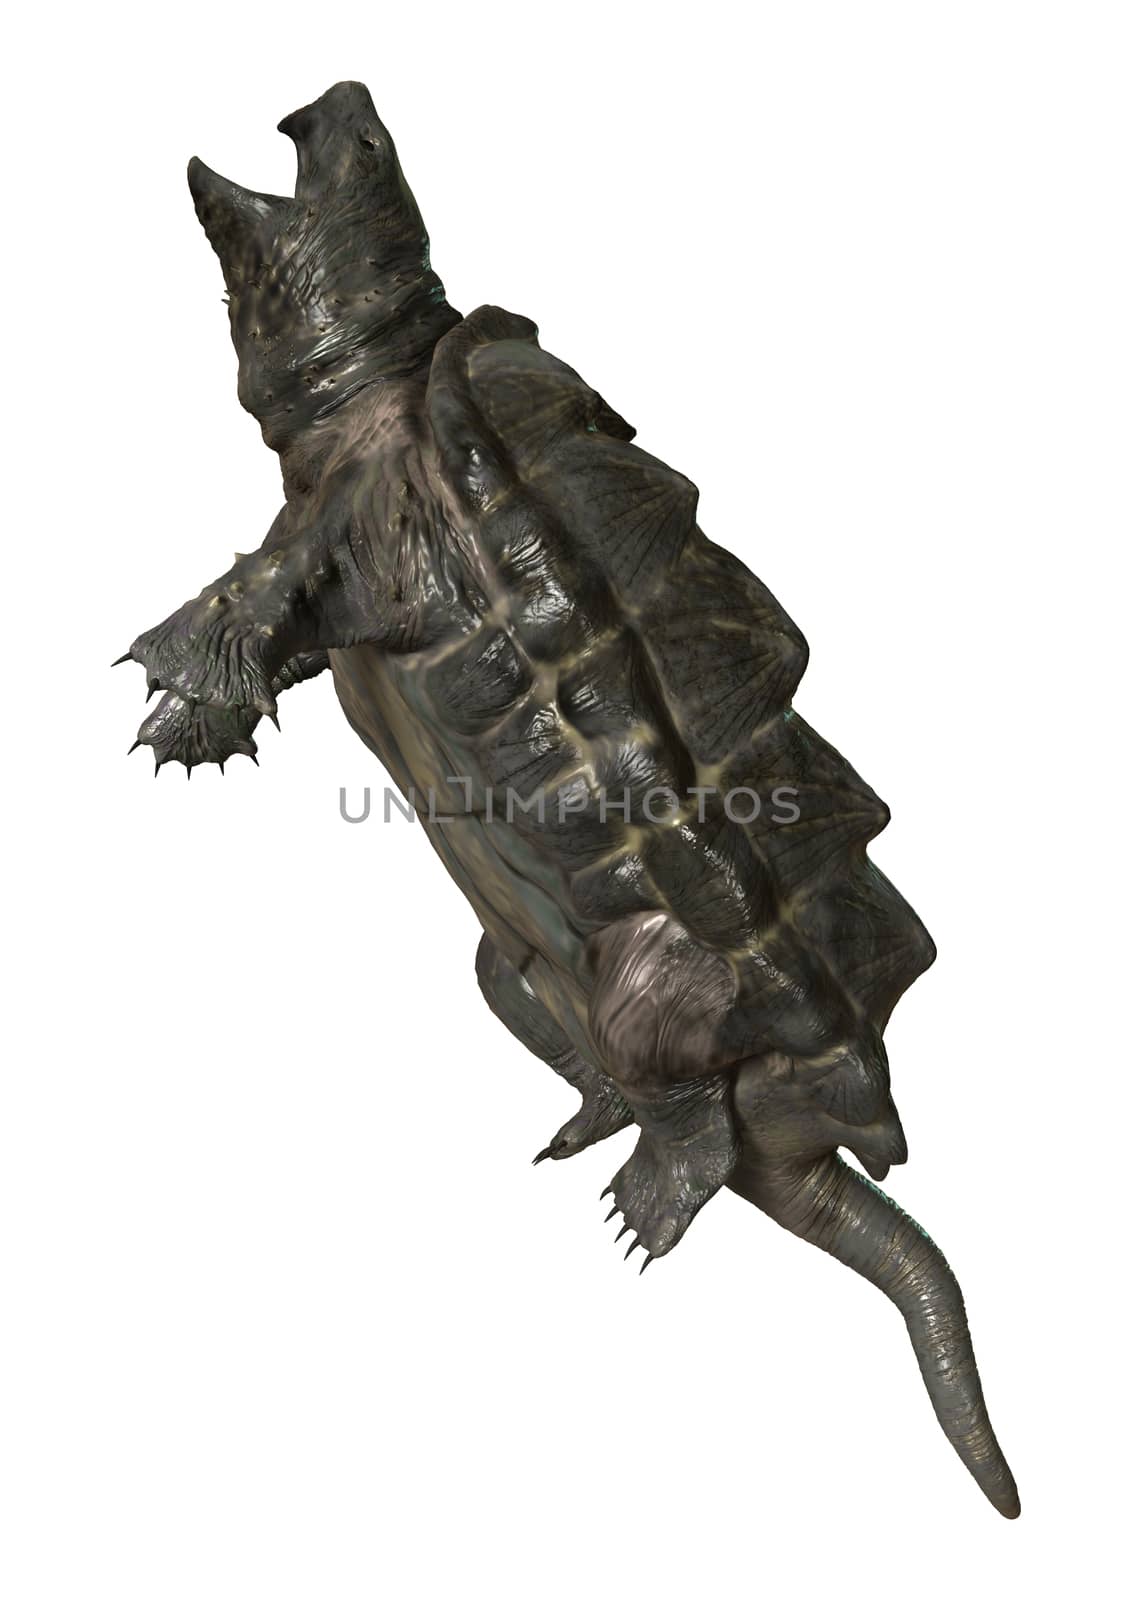 3D digital render of an alligator snapping turtle isolated on white background